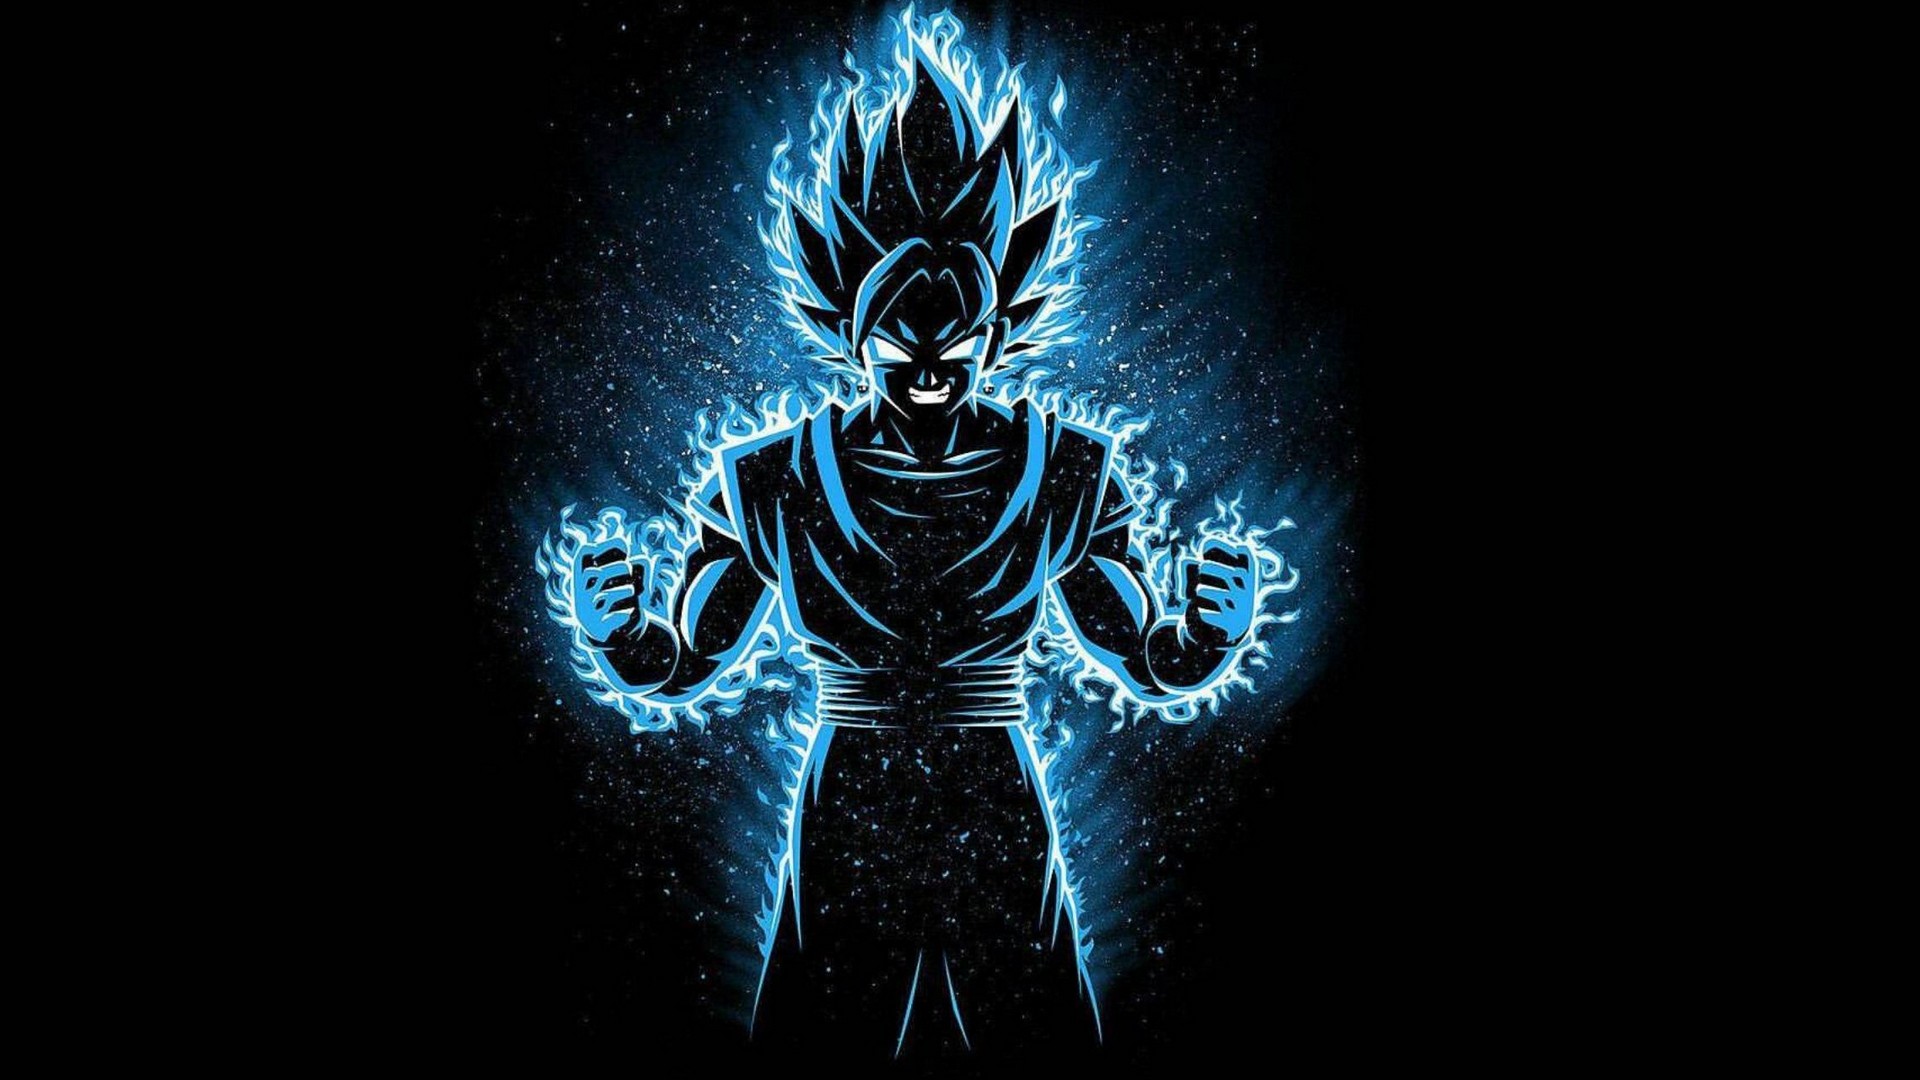 Black Goku Desktop Backgrounds With Resolution 1920X1080 pixel. You can make this wallpaper for your Desktop Computer Backgrounds, Mac Wallpapers, Android Lock screen or iPhone Screensavers